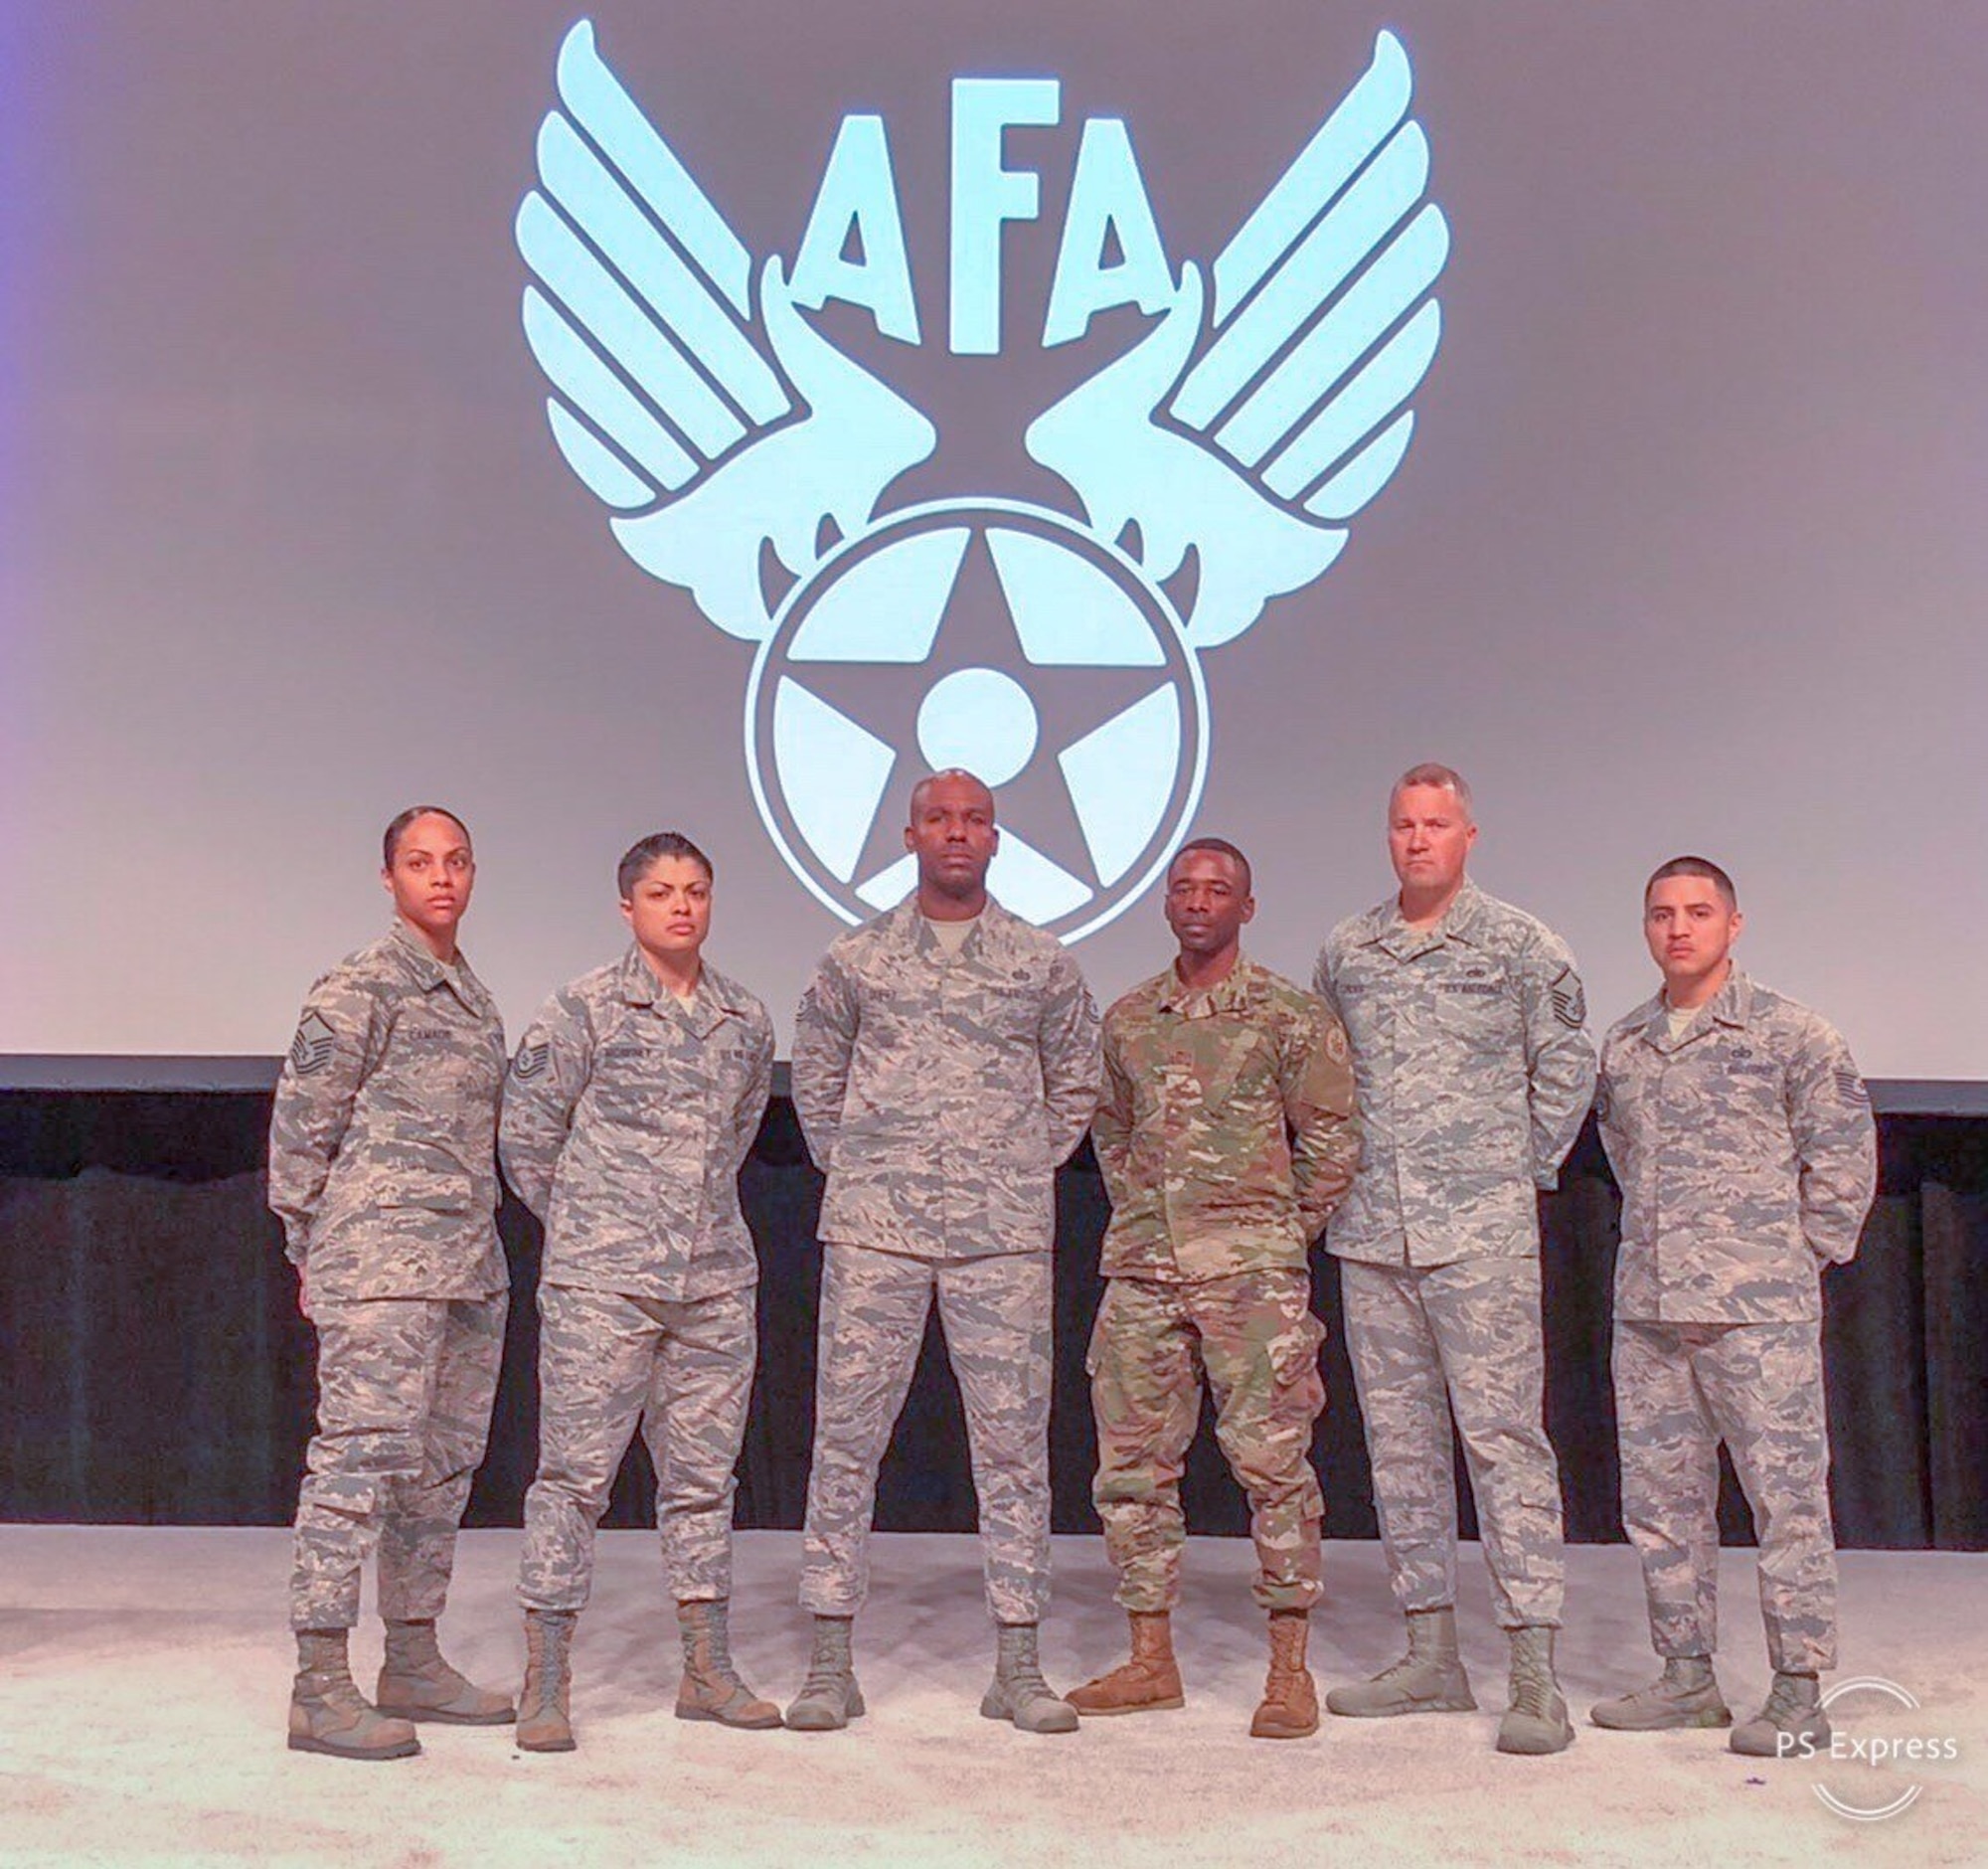 Military Training Instructors with the 737th Training Group accept the 2018 Etchberger Team of the Year award during the 2019 Air Force Association Symposium in Orlando, Fla., March 1, 2019. One of the MTI team’s biggest accomplishments included implementation of the Air Force Basic Military Training curriculum changes, which are designed to graduate more lethal and ready Airmen. (U.S. Air Force photo by 1st Lt. Kayshel Trudell)